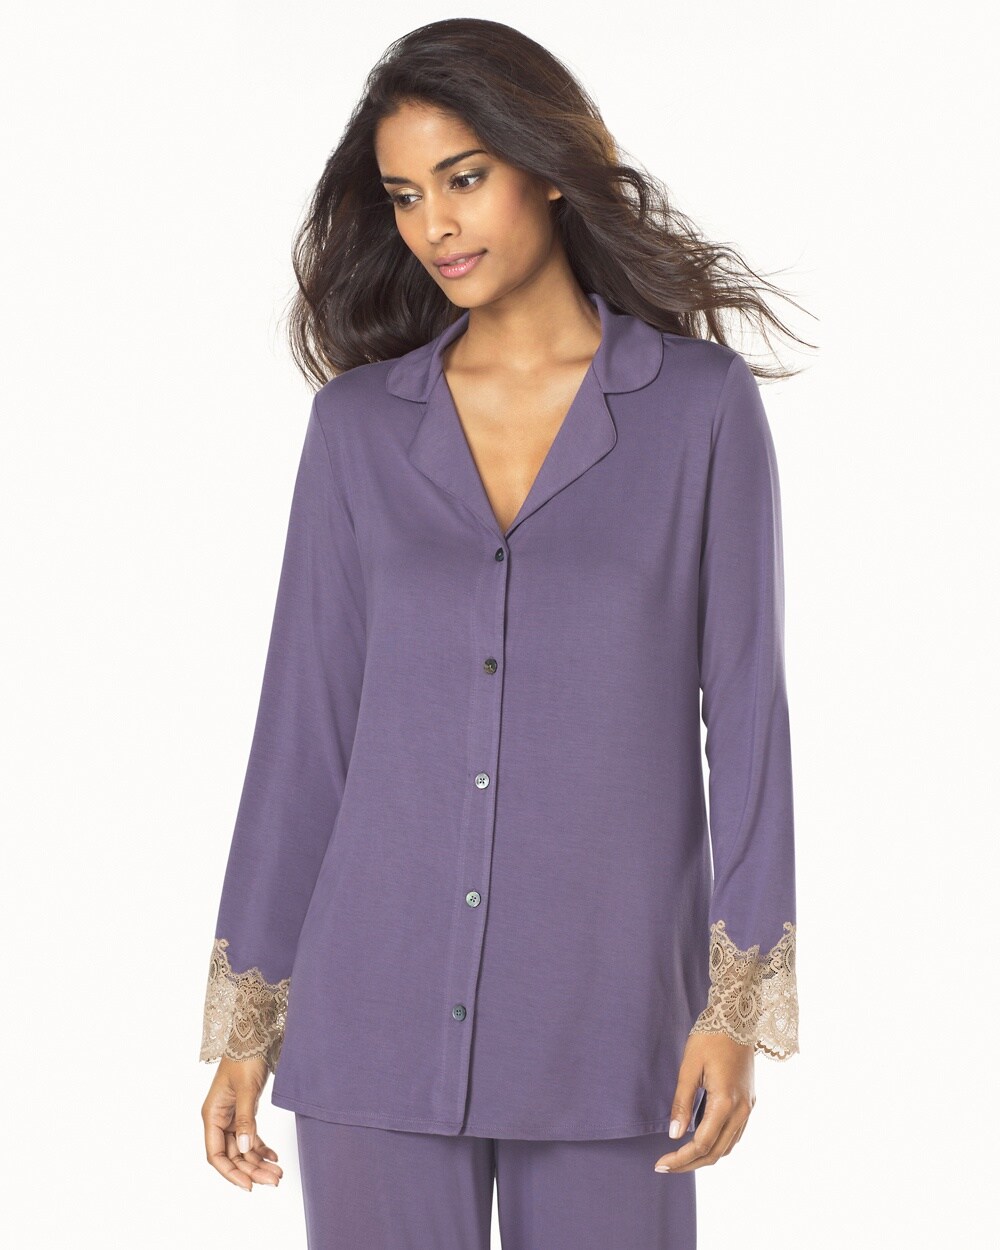 Medallion Lace Cool Nights Long Seeve Pajama Top Grape With Soft Tan Lace